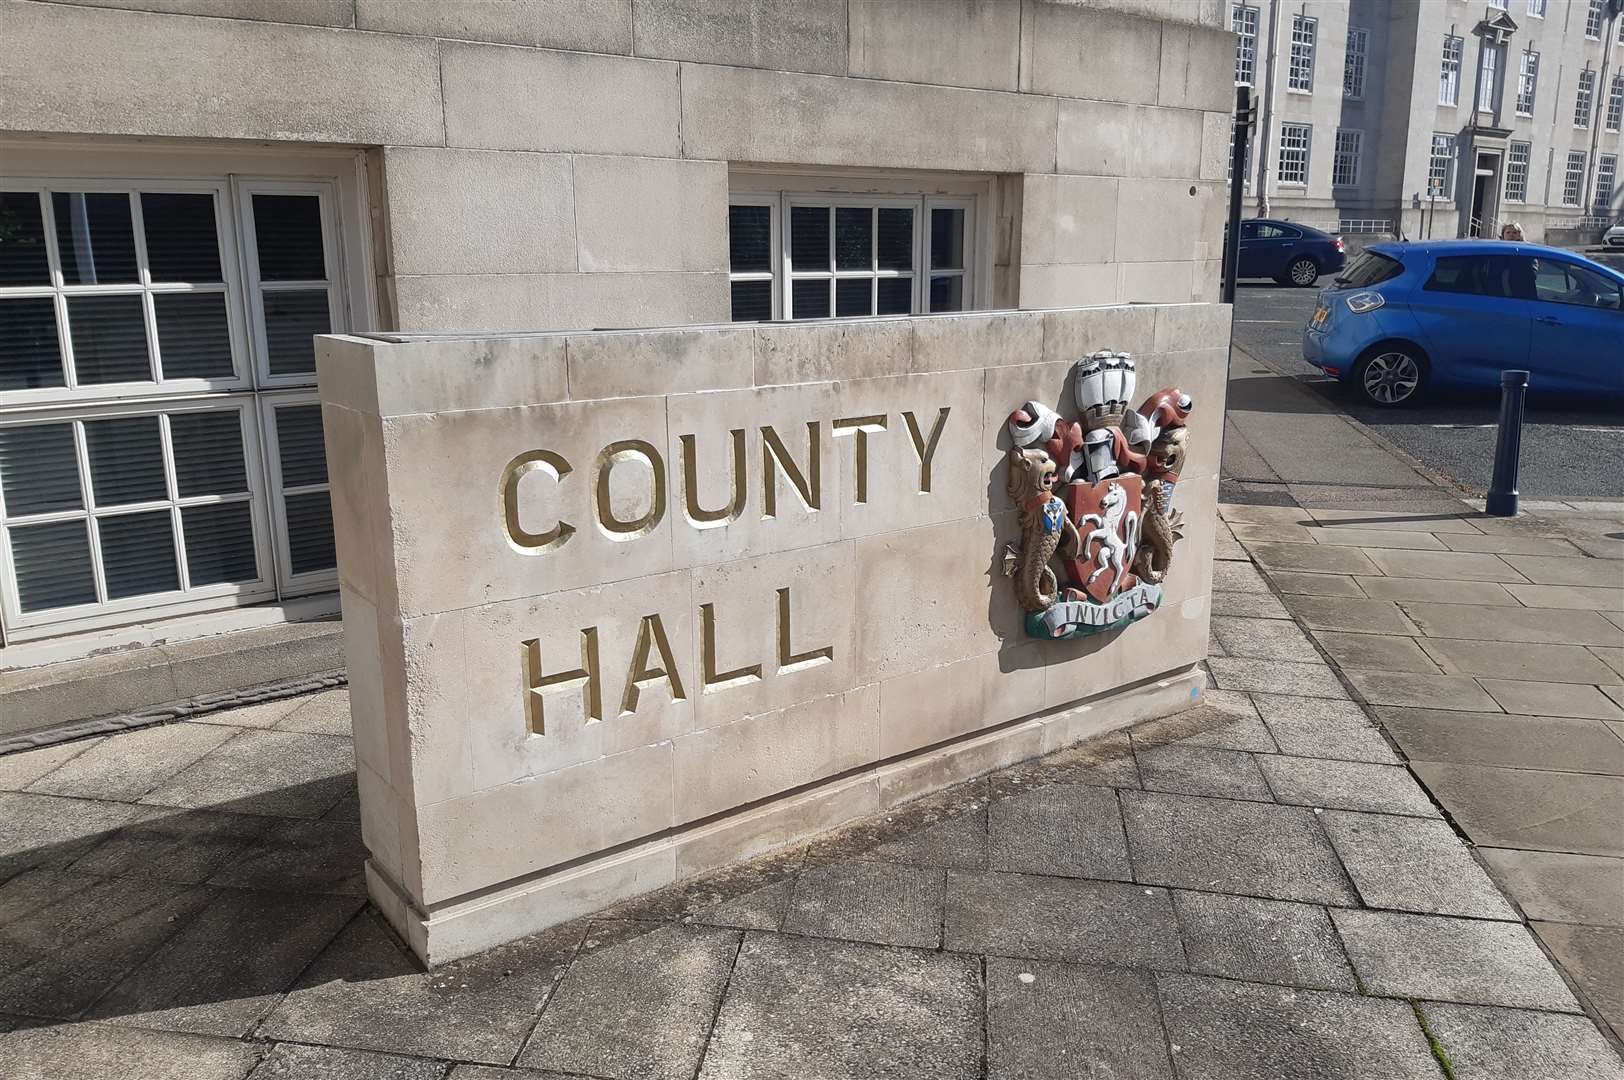 Kent County Council headquarters in Maidstone